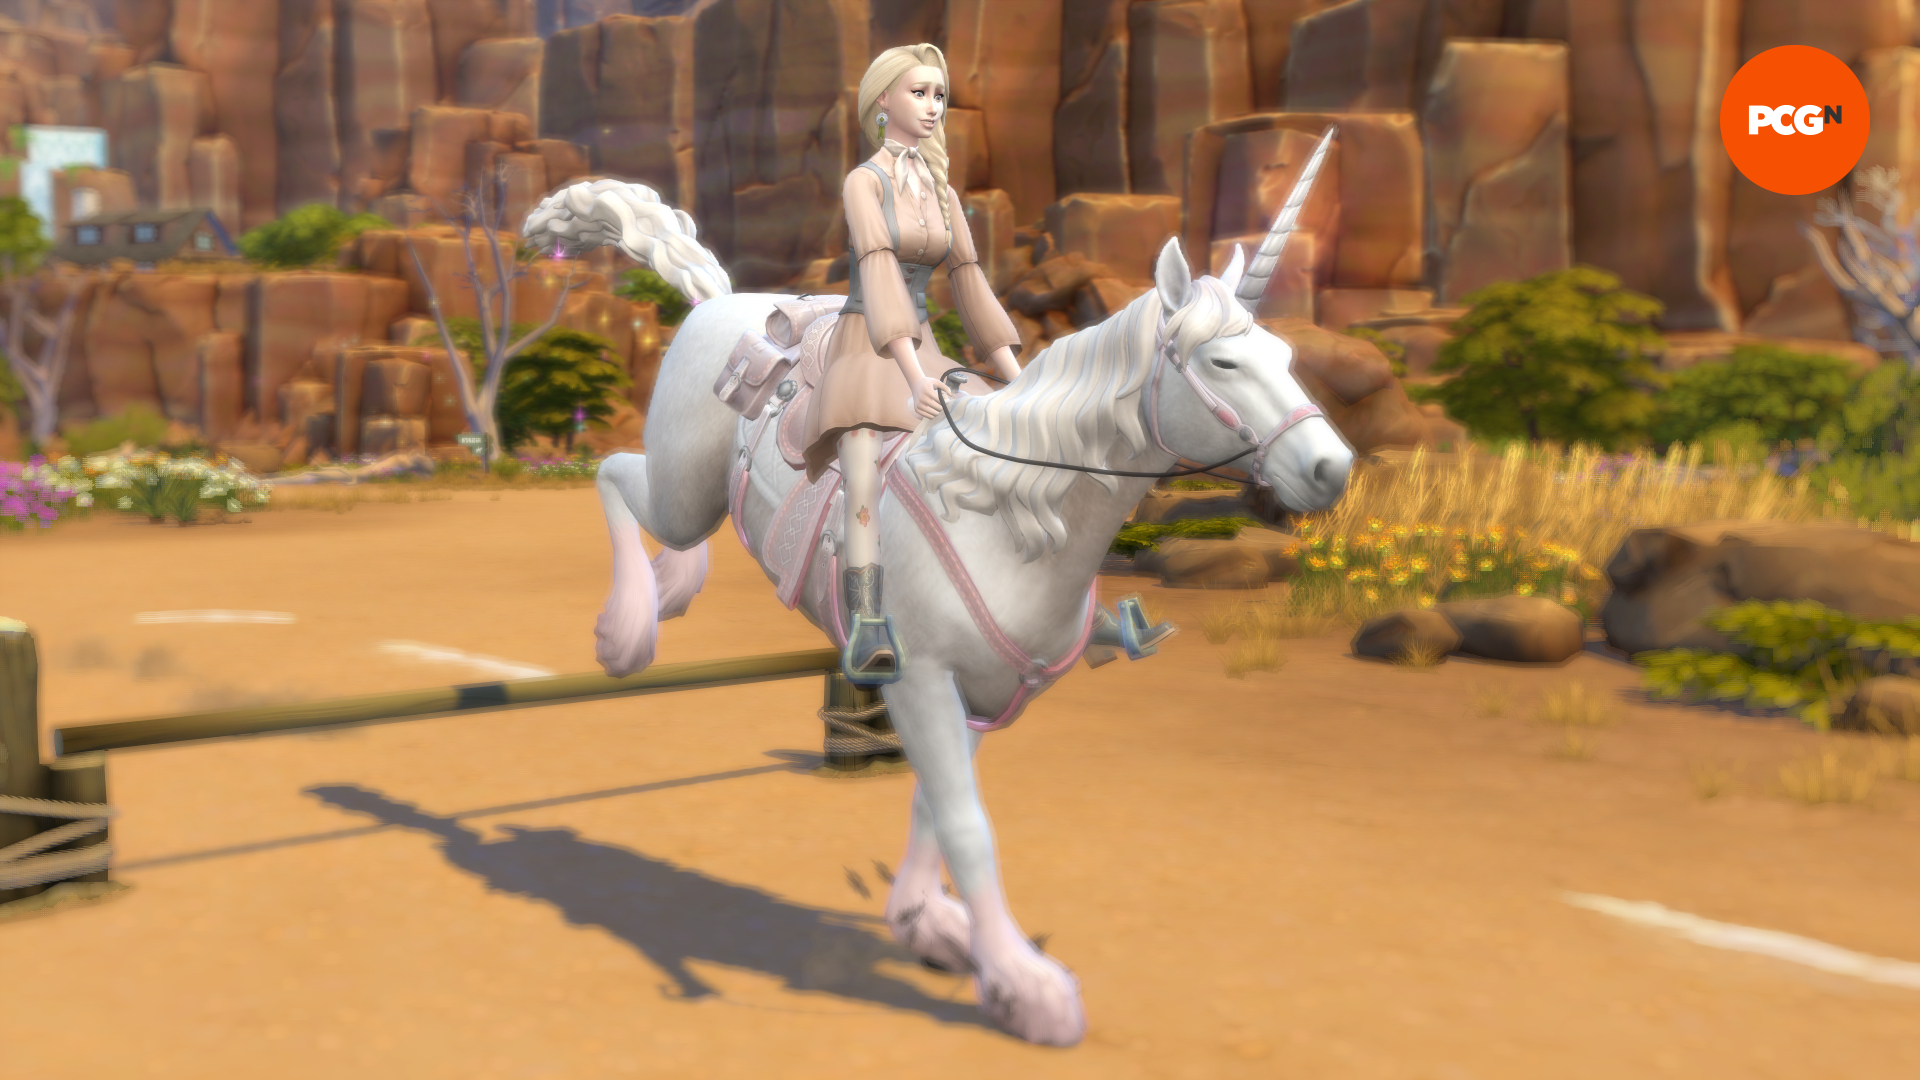 A female Sim jumping over an obstacle on a pink and white unicorn in the desert